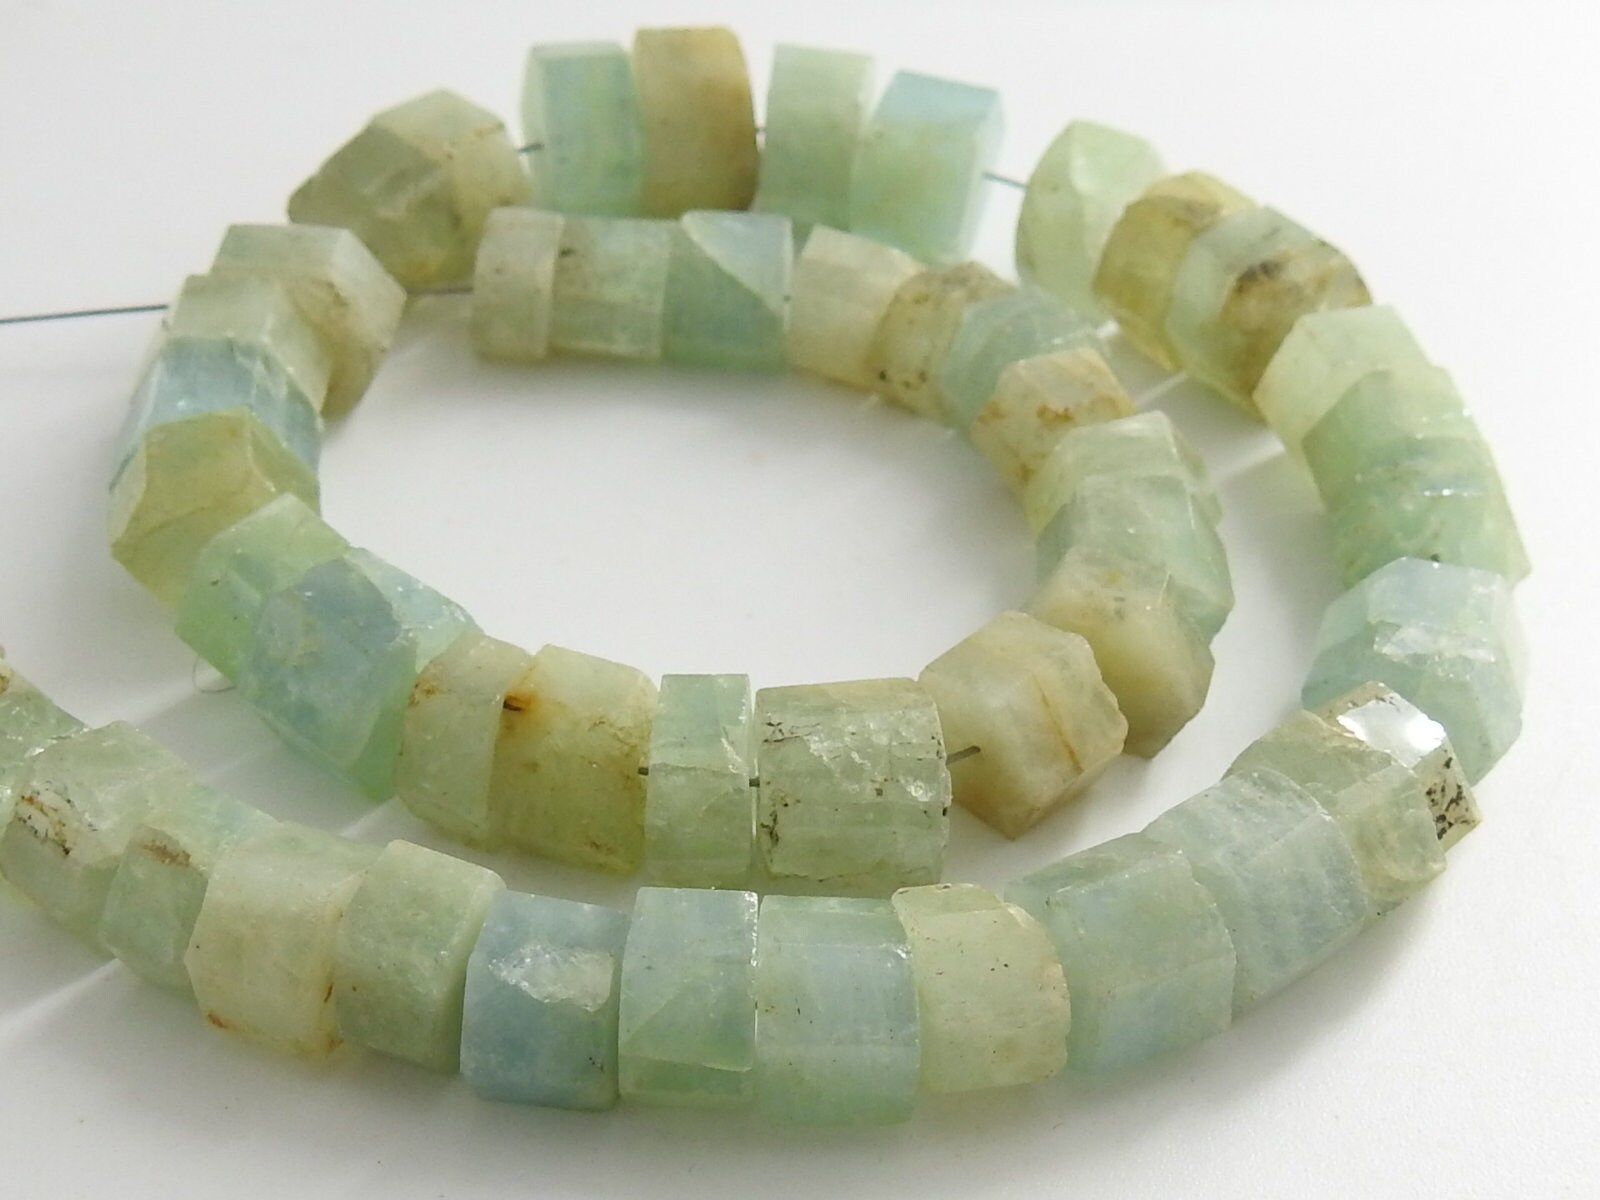 Aquamarine Faceted Tyre,Coin,Button,Wheel Shape Beads,Blue,Loose Stone,10Inch 9X6To6X4MM Approx,Wholesale Price,New Arrival,100%NaturalT2 | Save 33% - Rajasthan Living 15